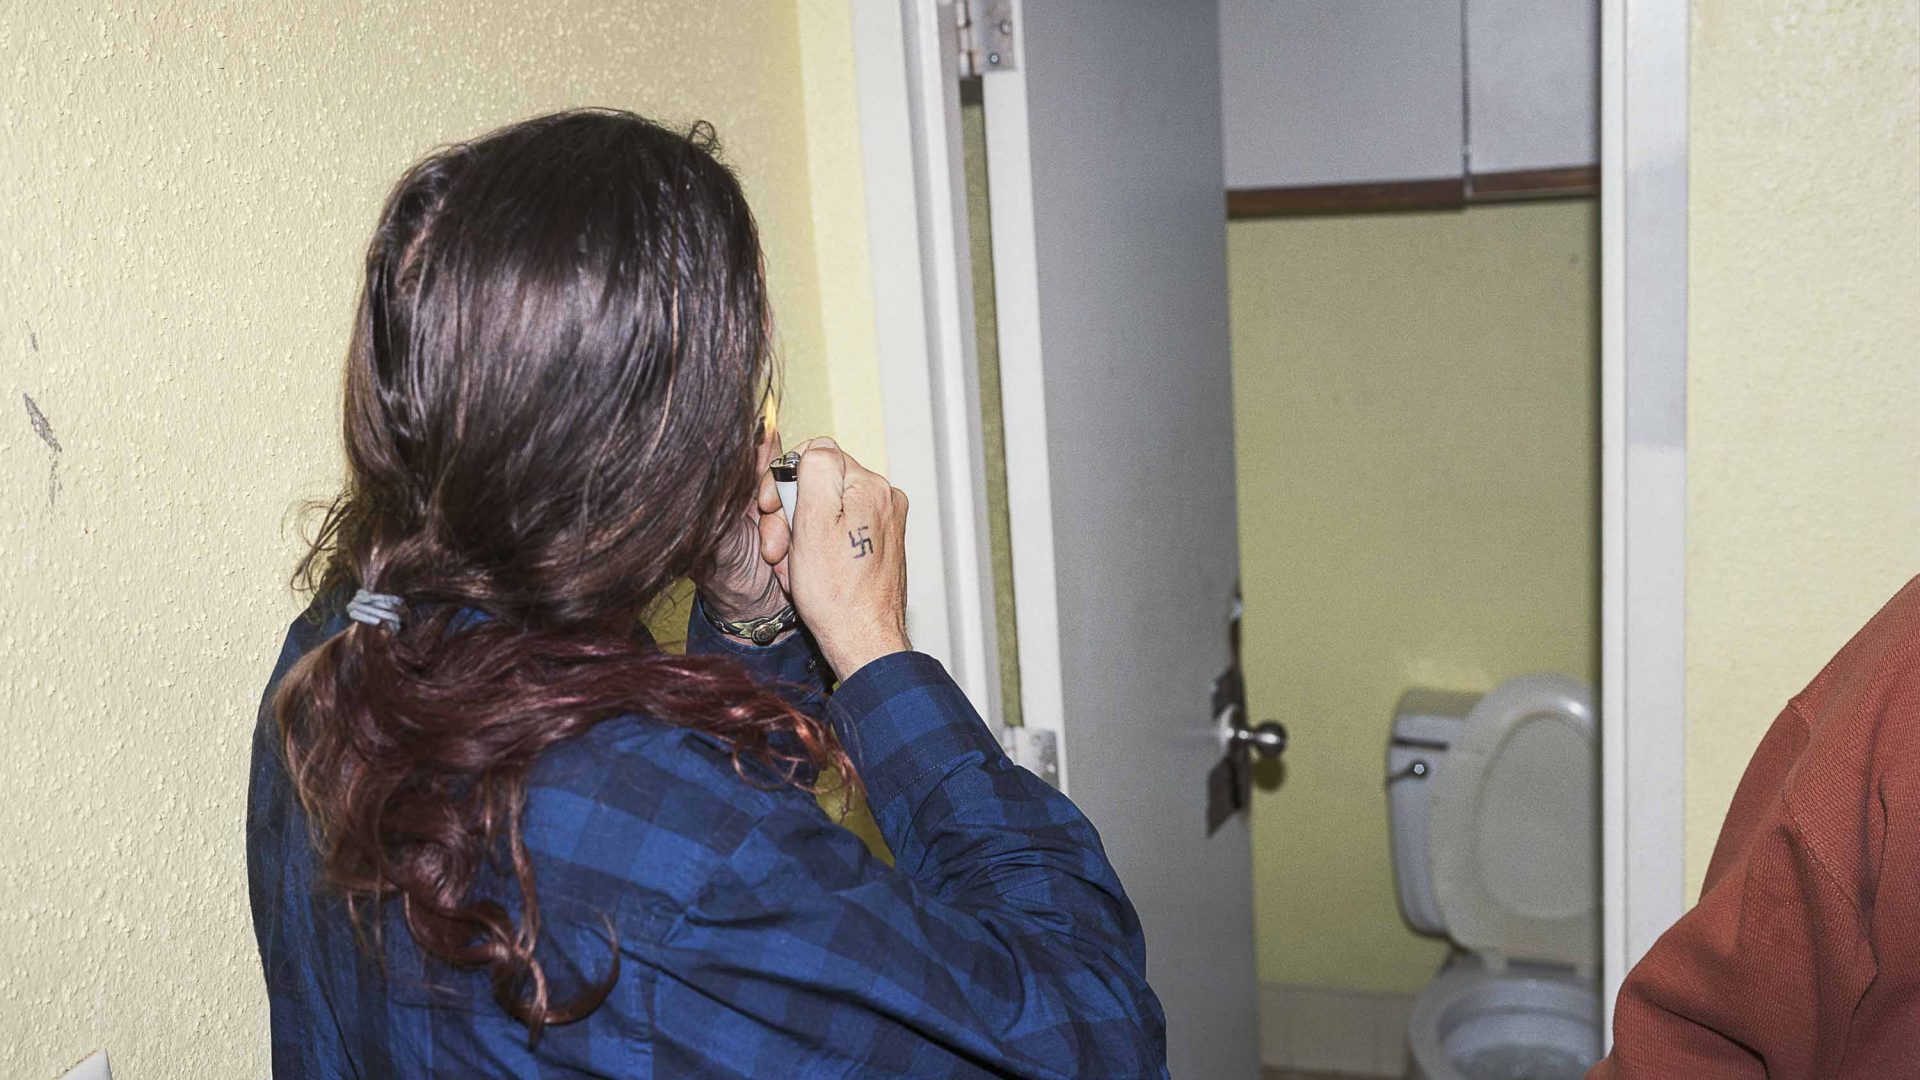 A man with long hair smokes in front of a toilet door.